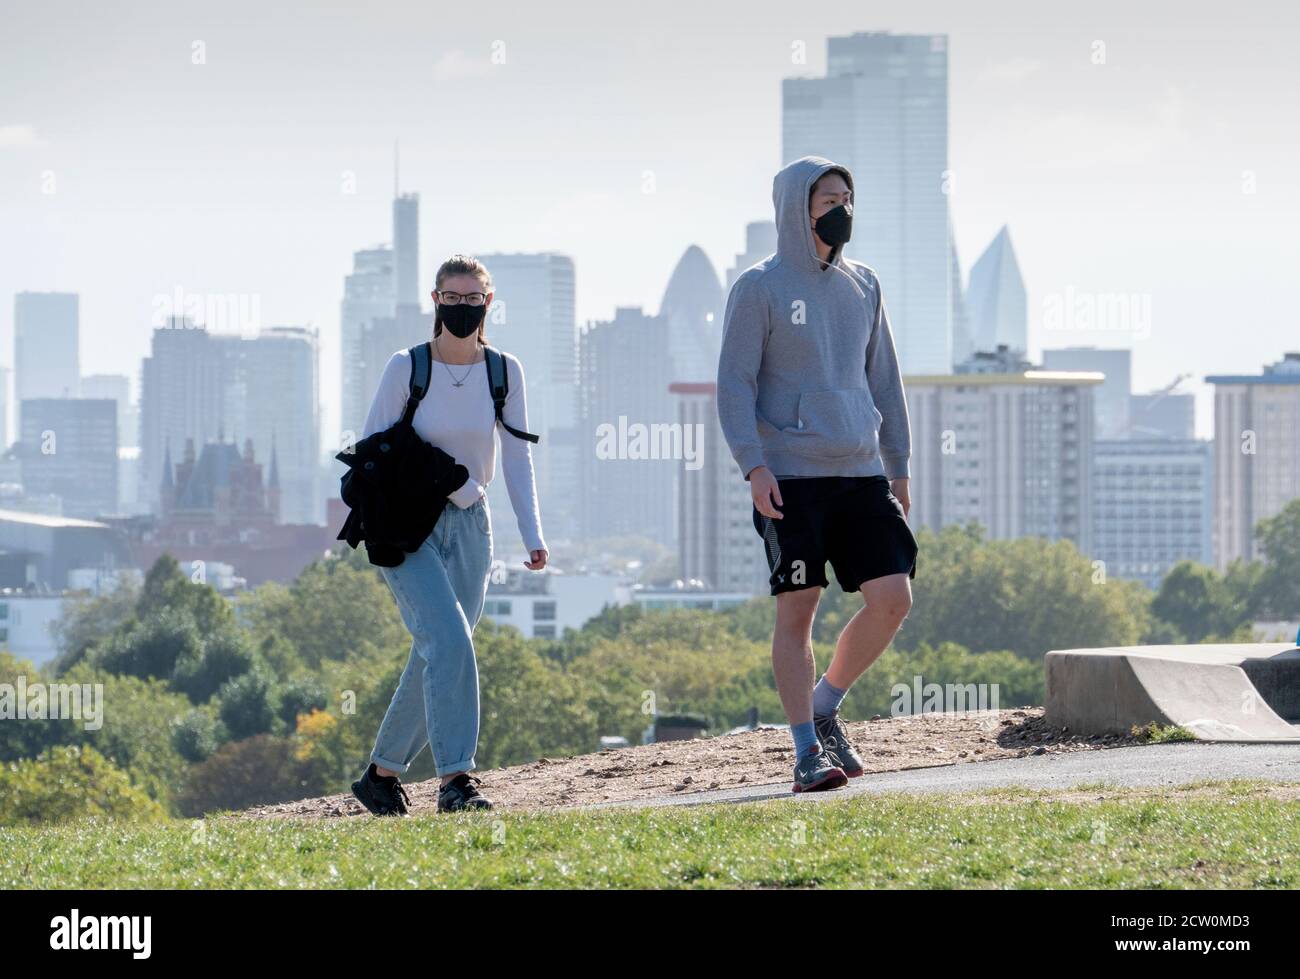 Possible Covid-19 Coronavirus 2nd wave lockdown for London. Londoners go about their daily routine of jogging, walking the dog or just going for a wal Stock Photo